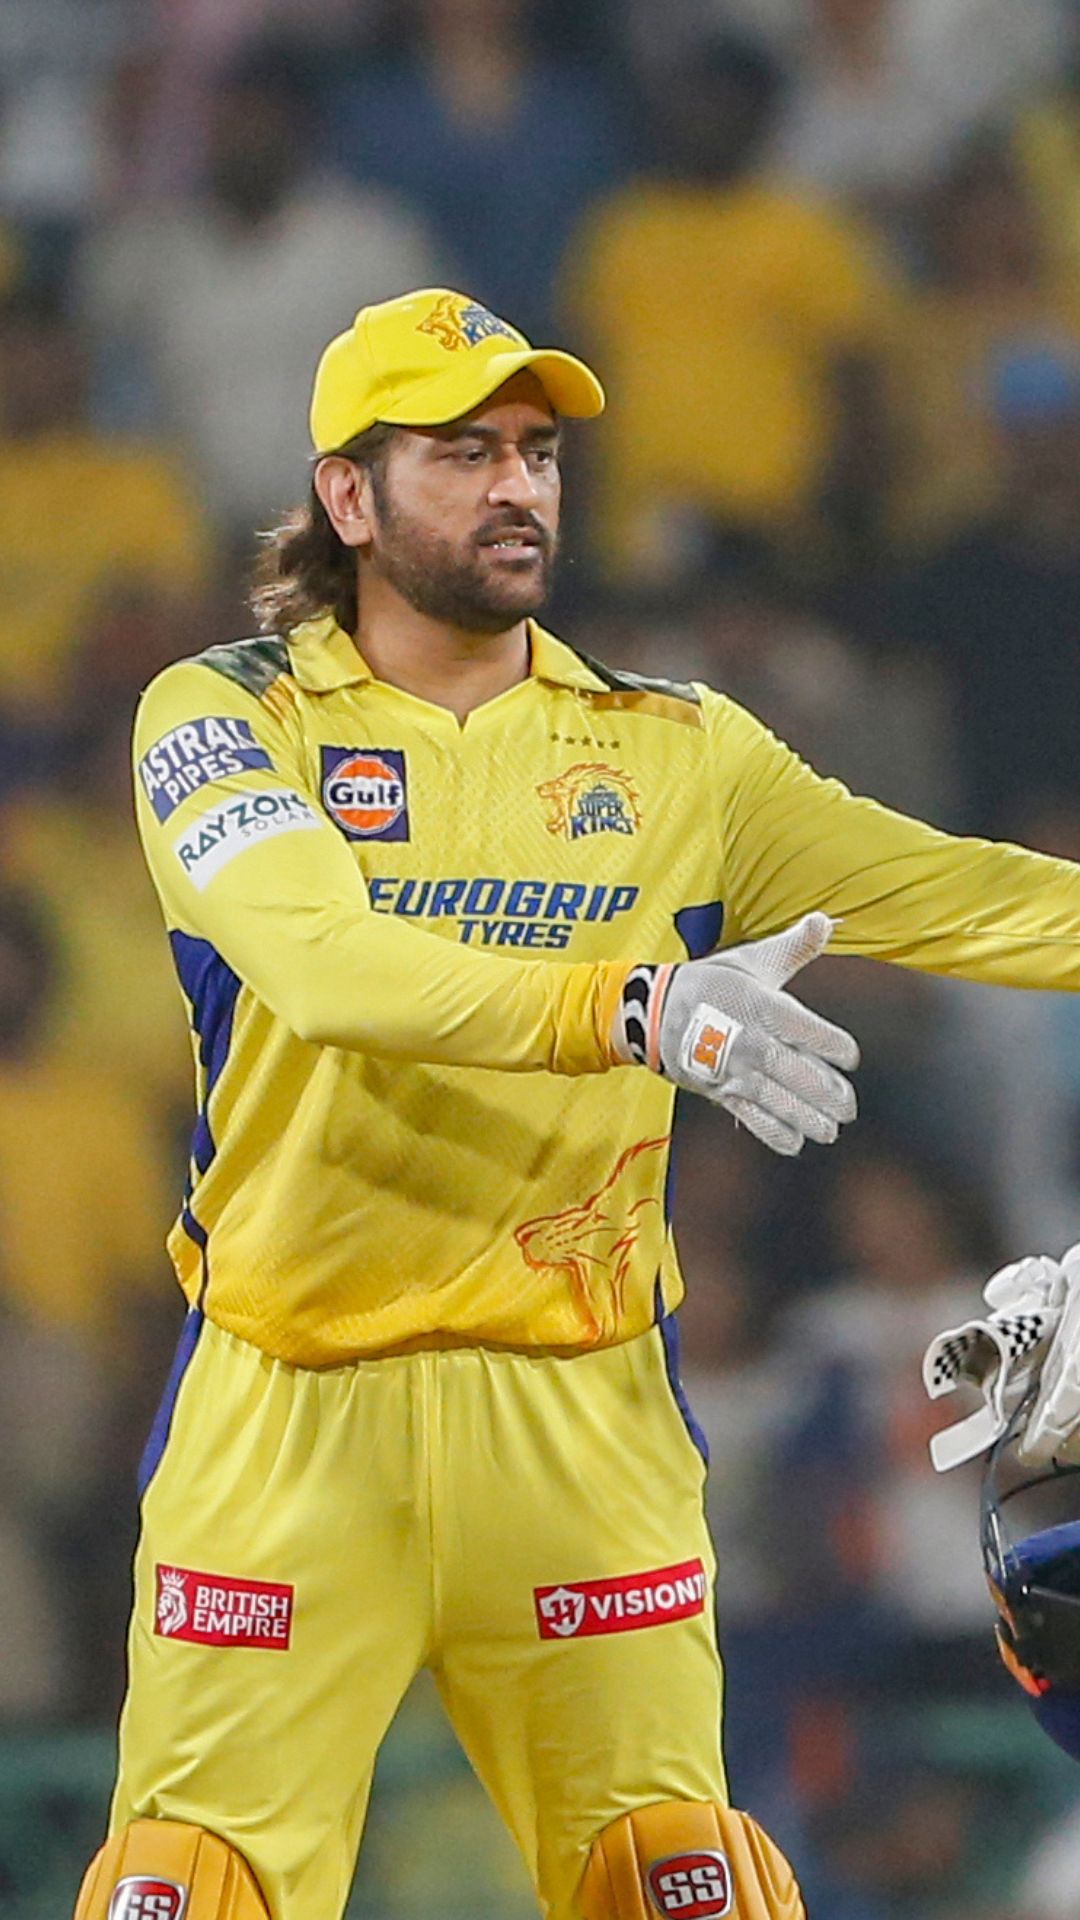 Players to remain not out in most consecutive IPL innings; Dhoni joins Binny at top